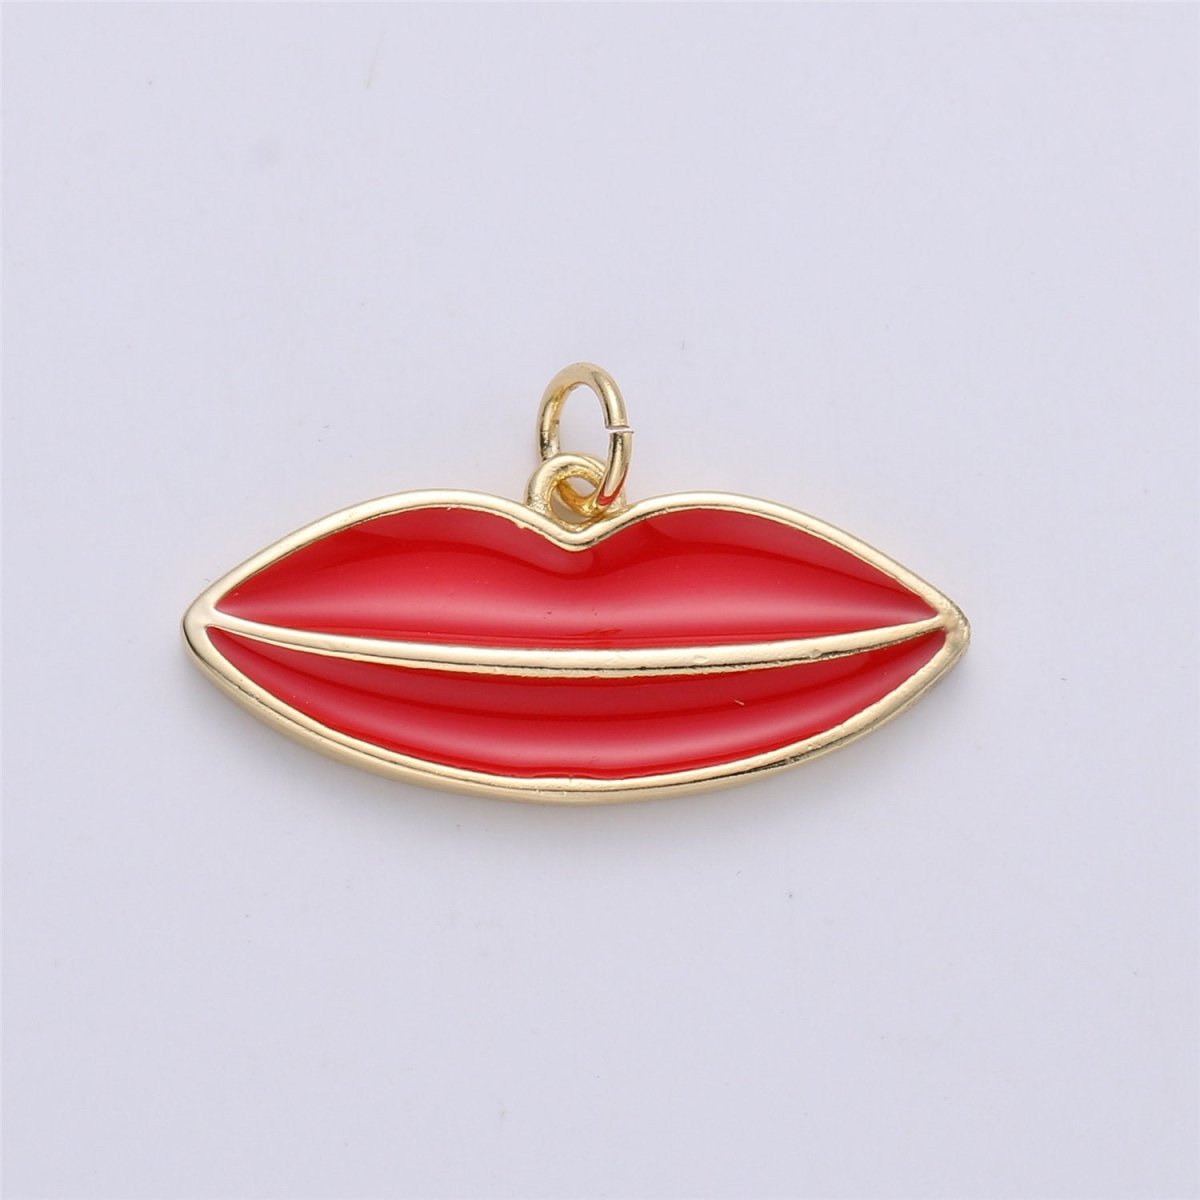 Dainty Red Enamel Lips charm, 25mmx15mm, Gold lips charm, Lips Charm, 14K Gold Plated for Bracelet Necklace Earring Charm C-723 - DLUXCA